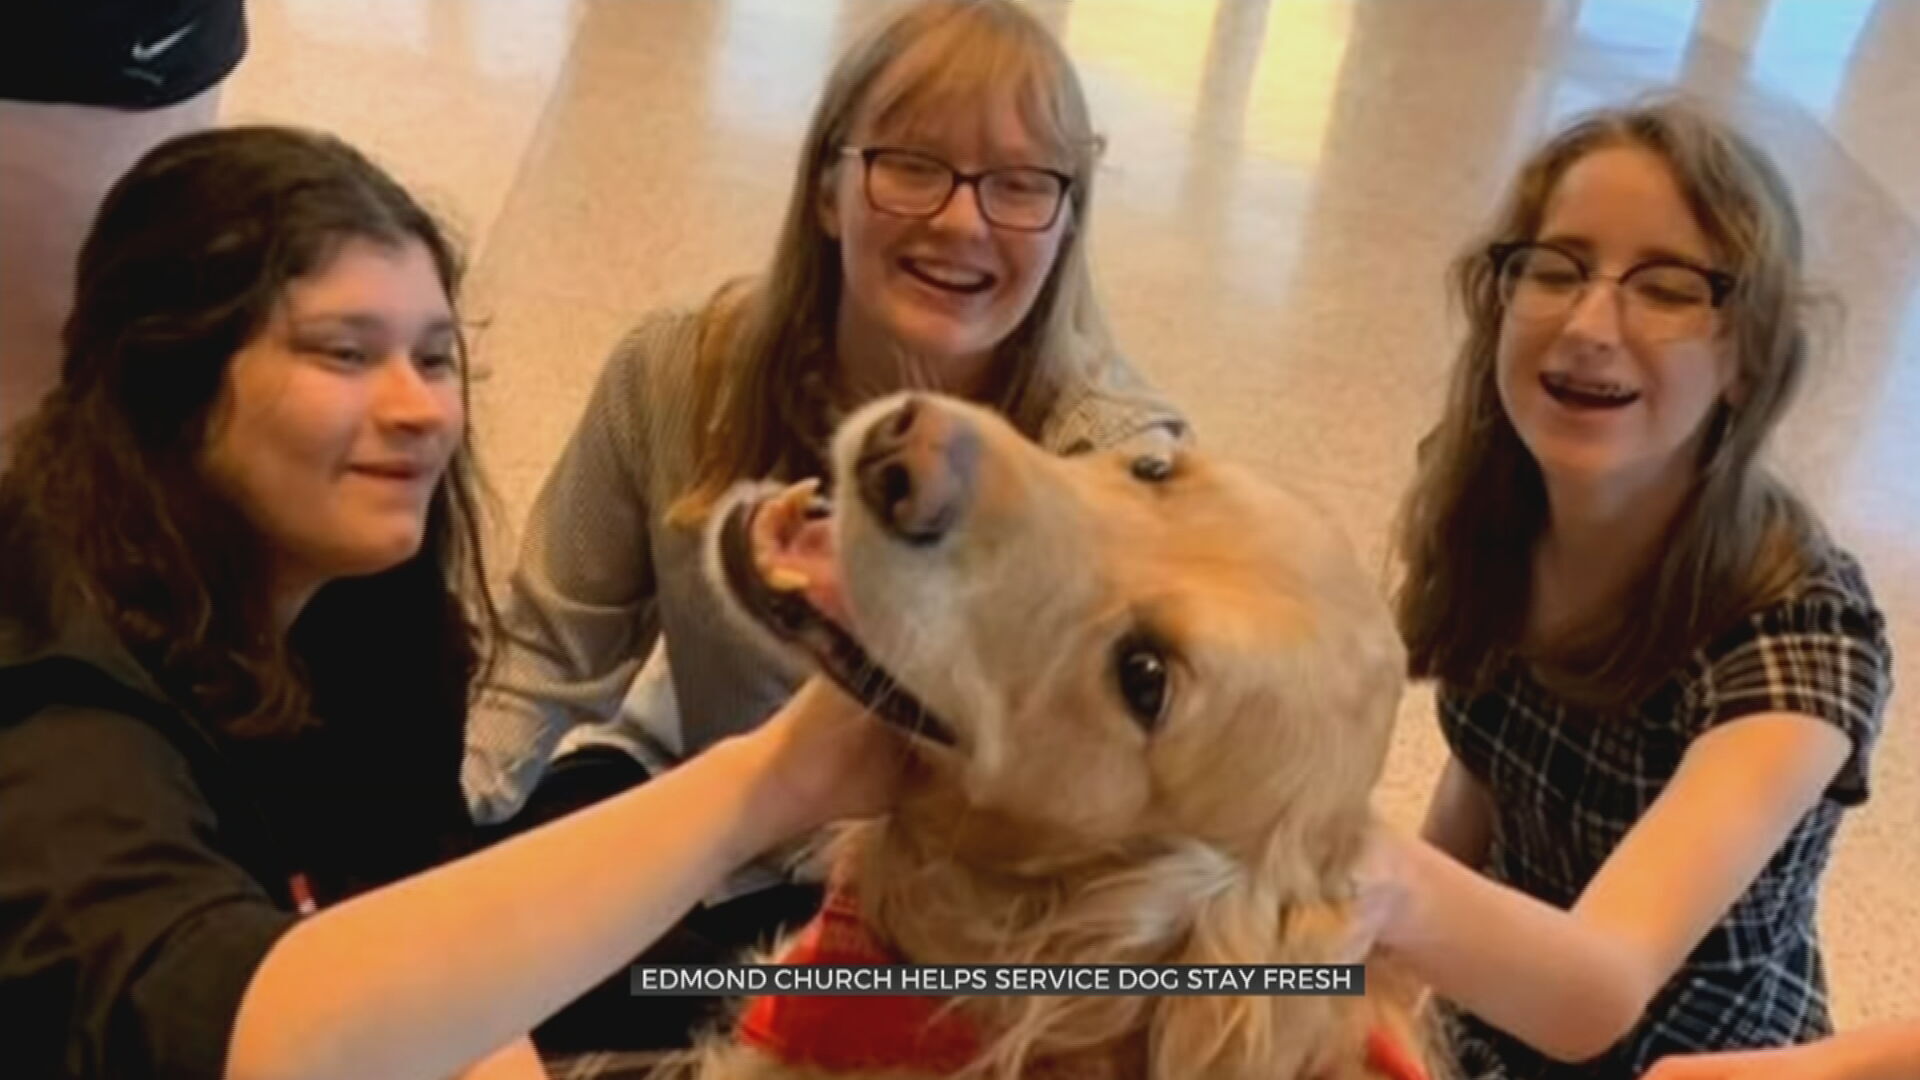 Church Helps Service Dog Who Has Been Out Of Service During COVID-19 